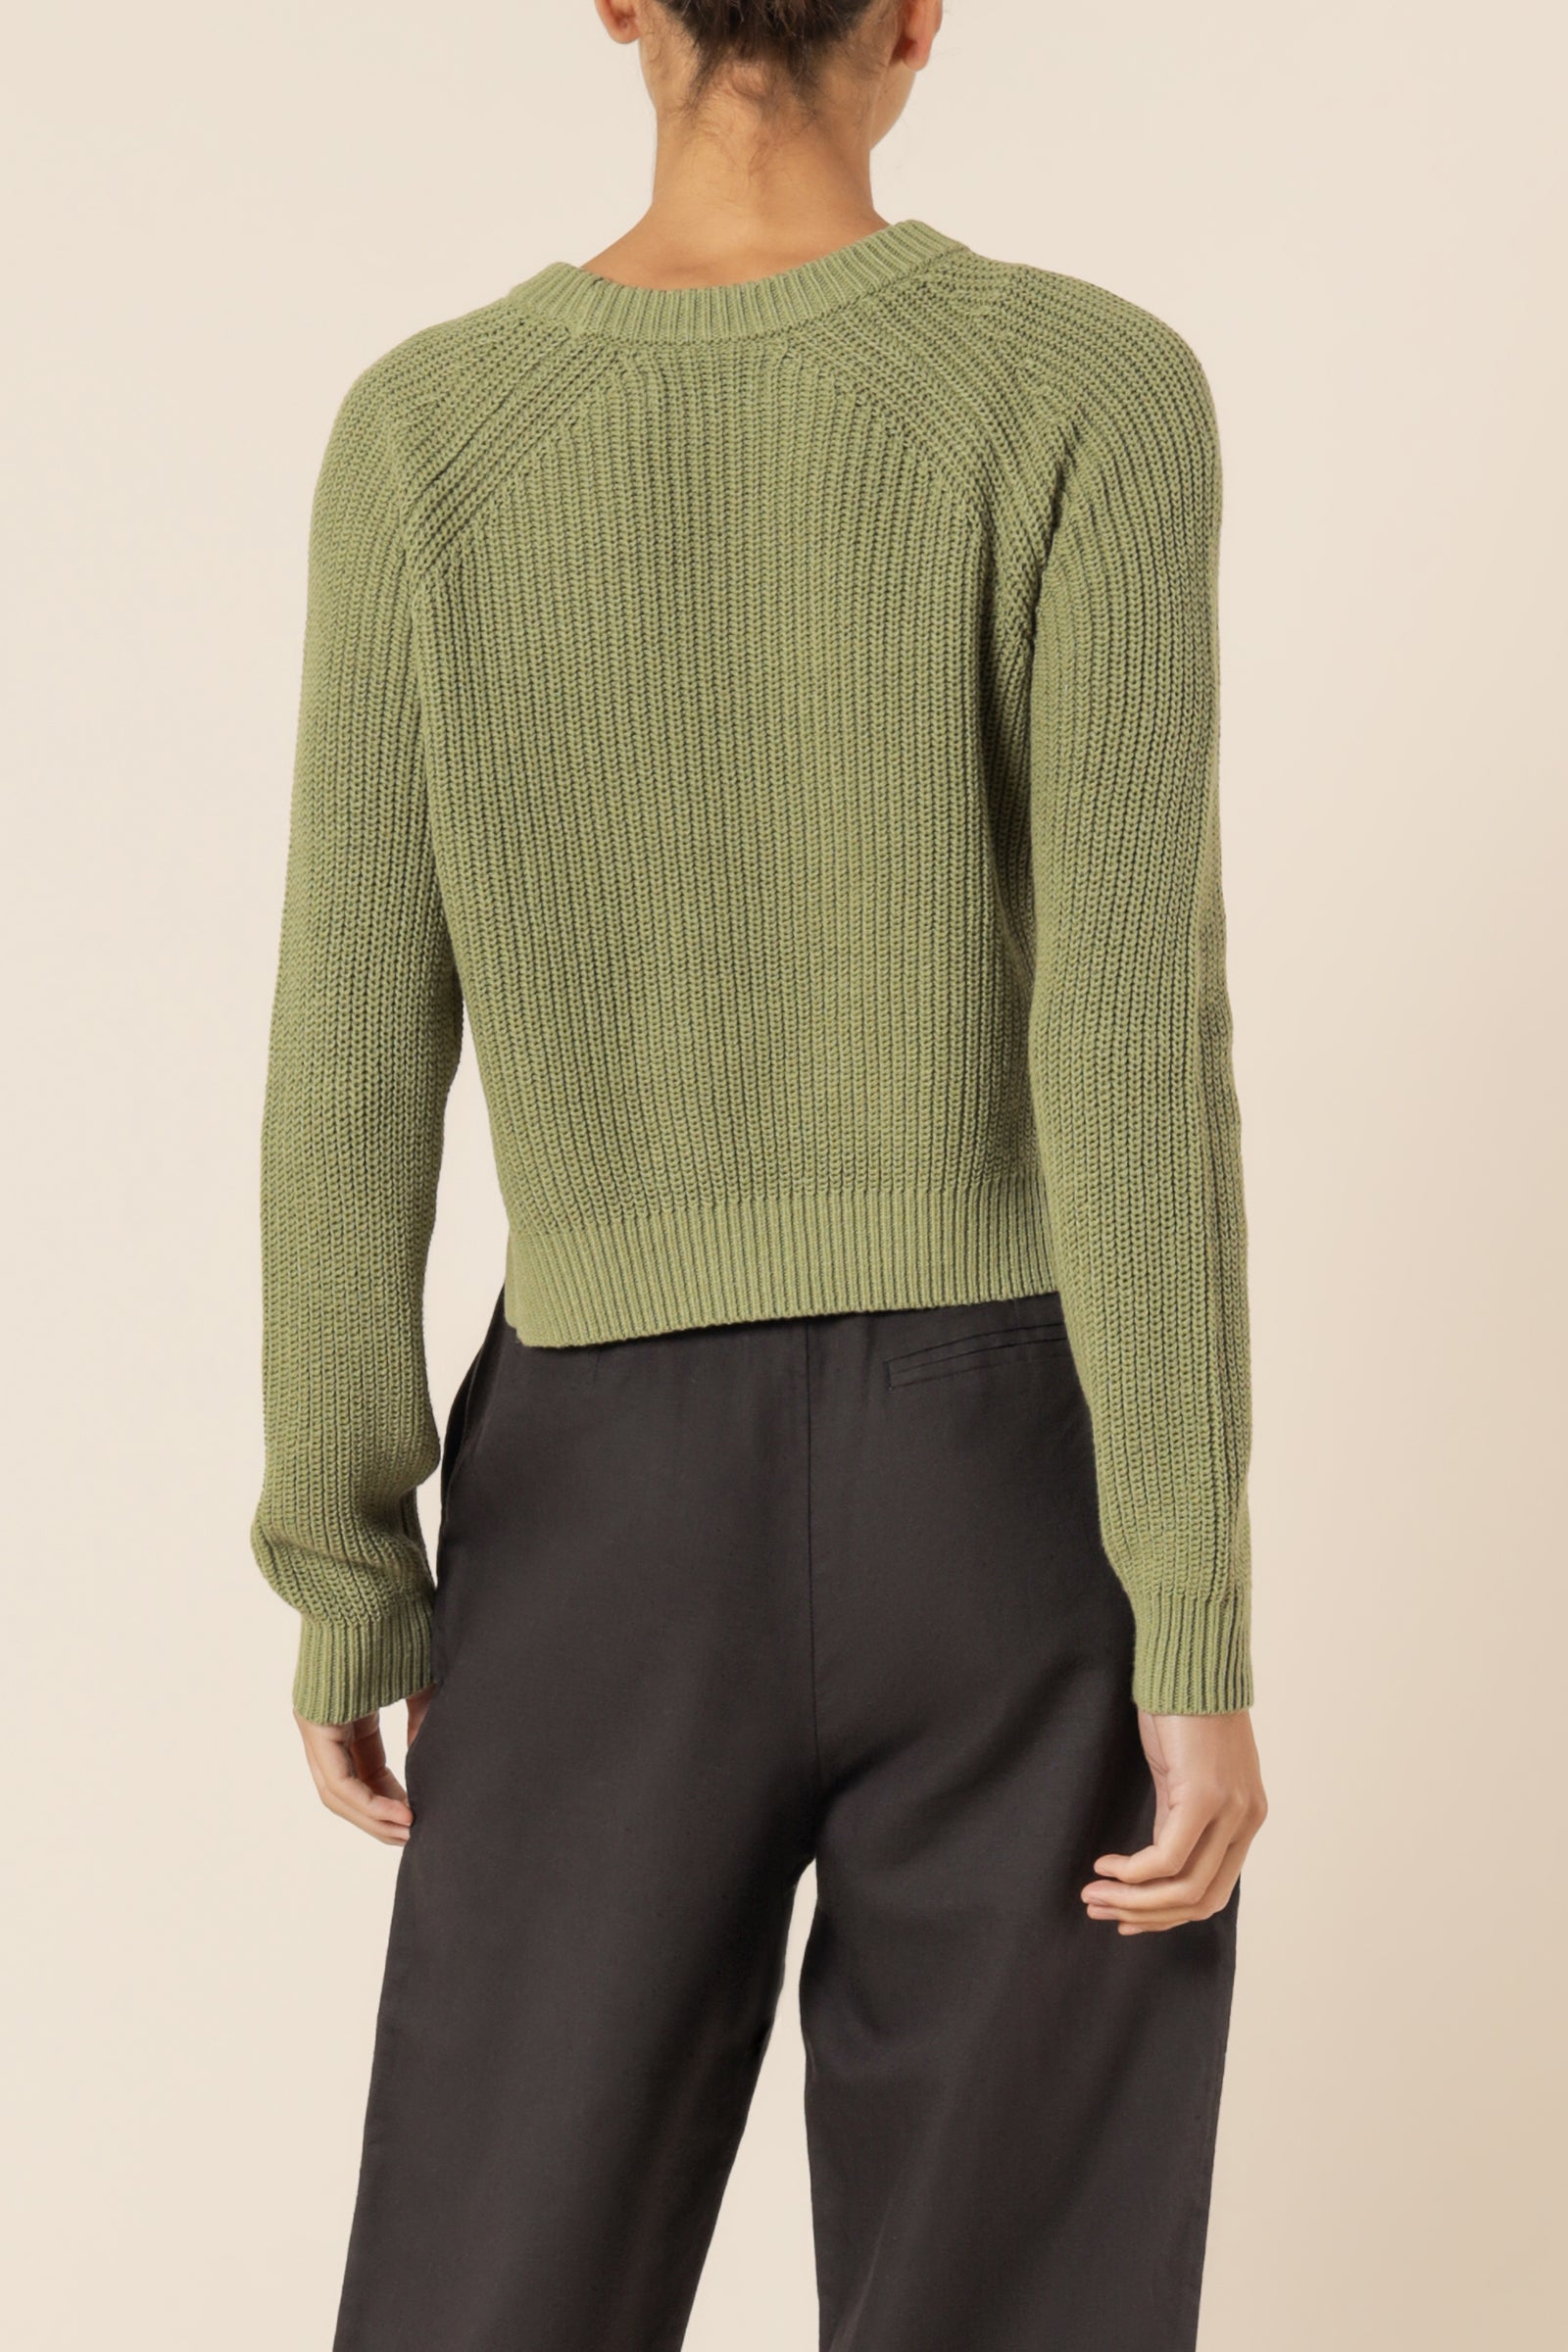 Nude Lucy kallie knit jumper washed sage knits